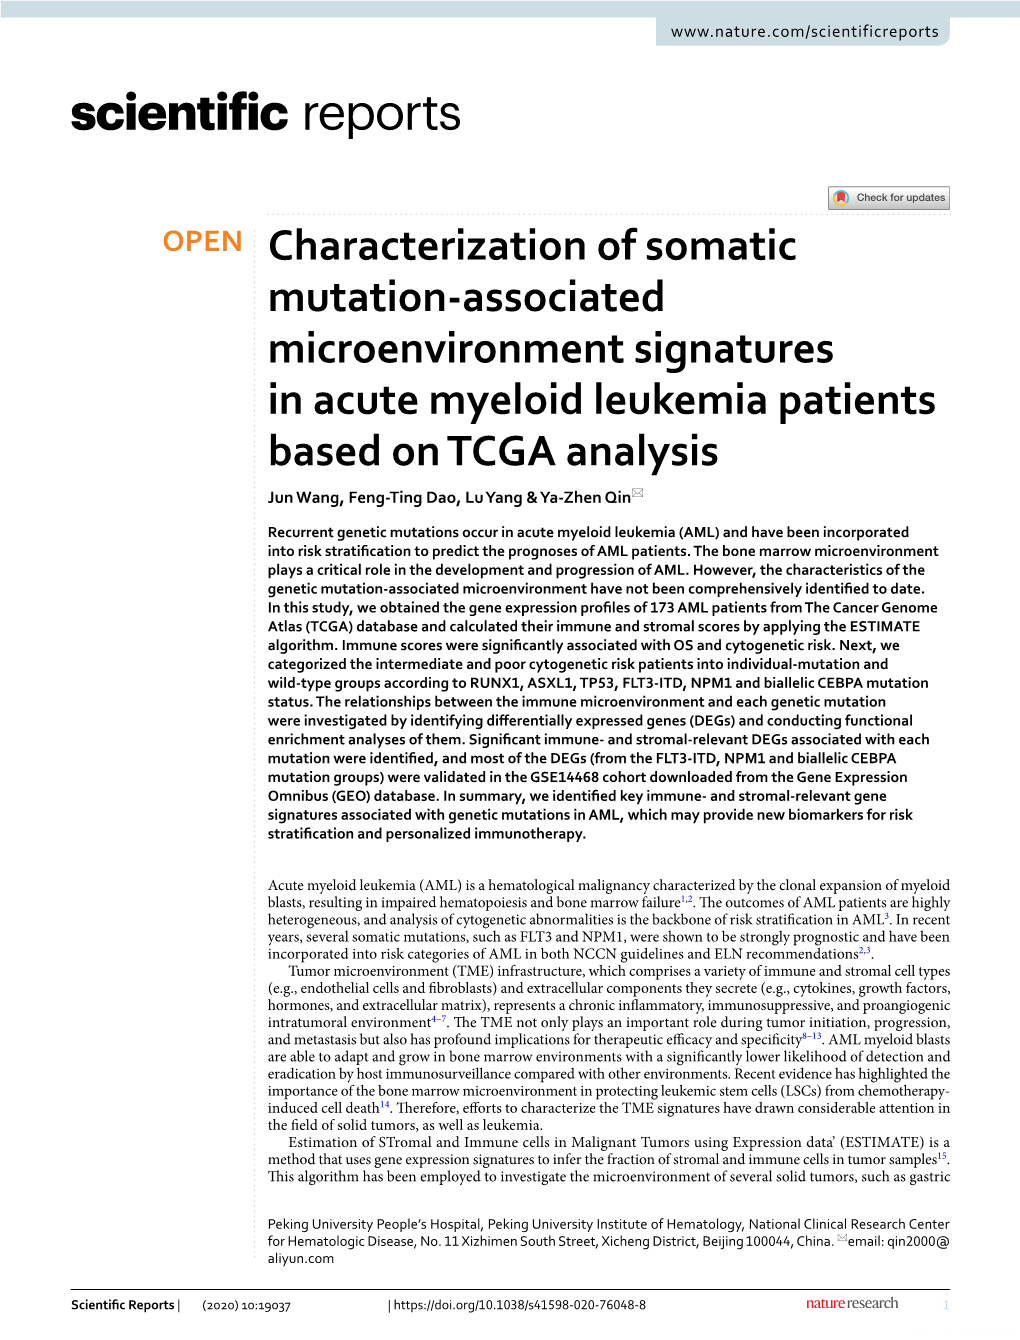 Characterization of Somatic Mutation-Associated Microenvironment Signatures in Acute Myeloid Leukemia Patients Based on TCGA